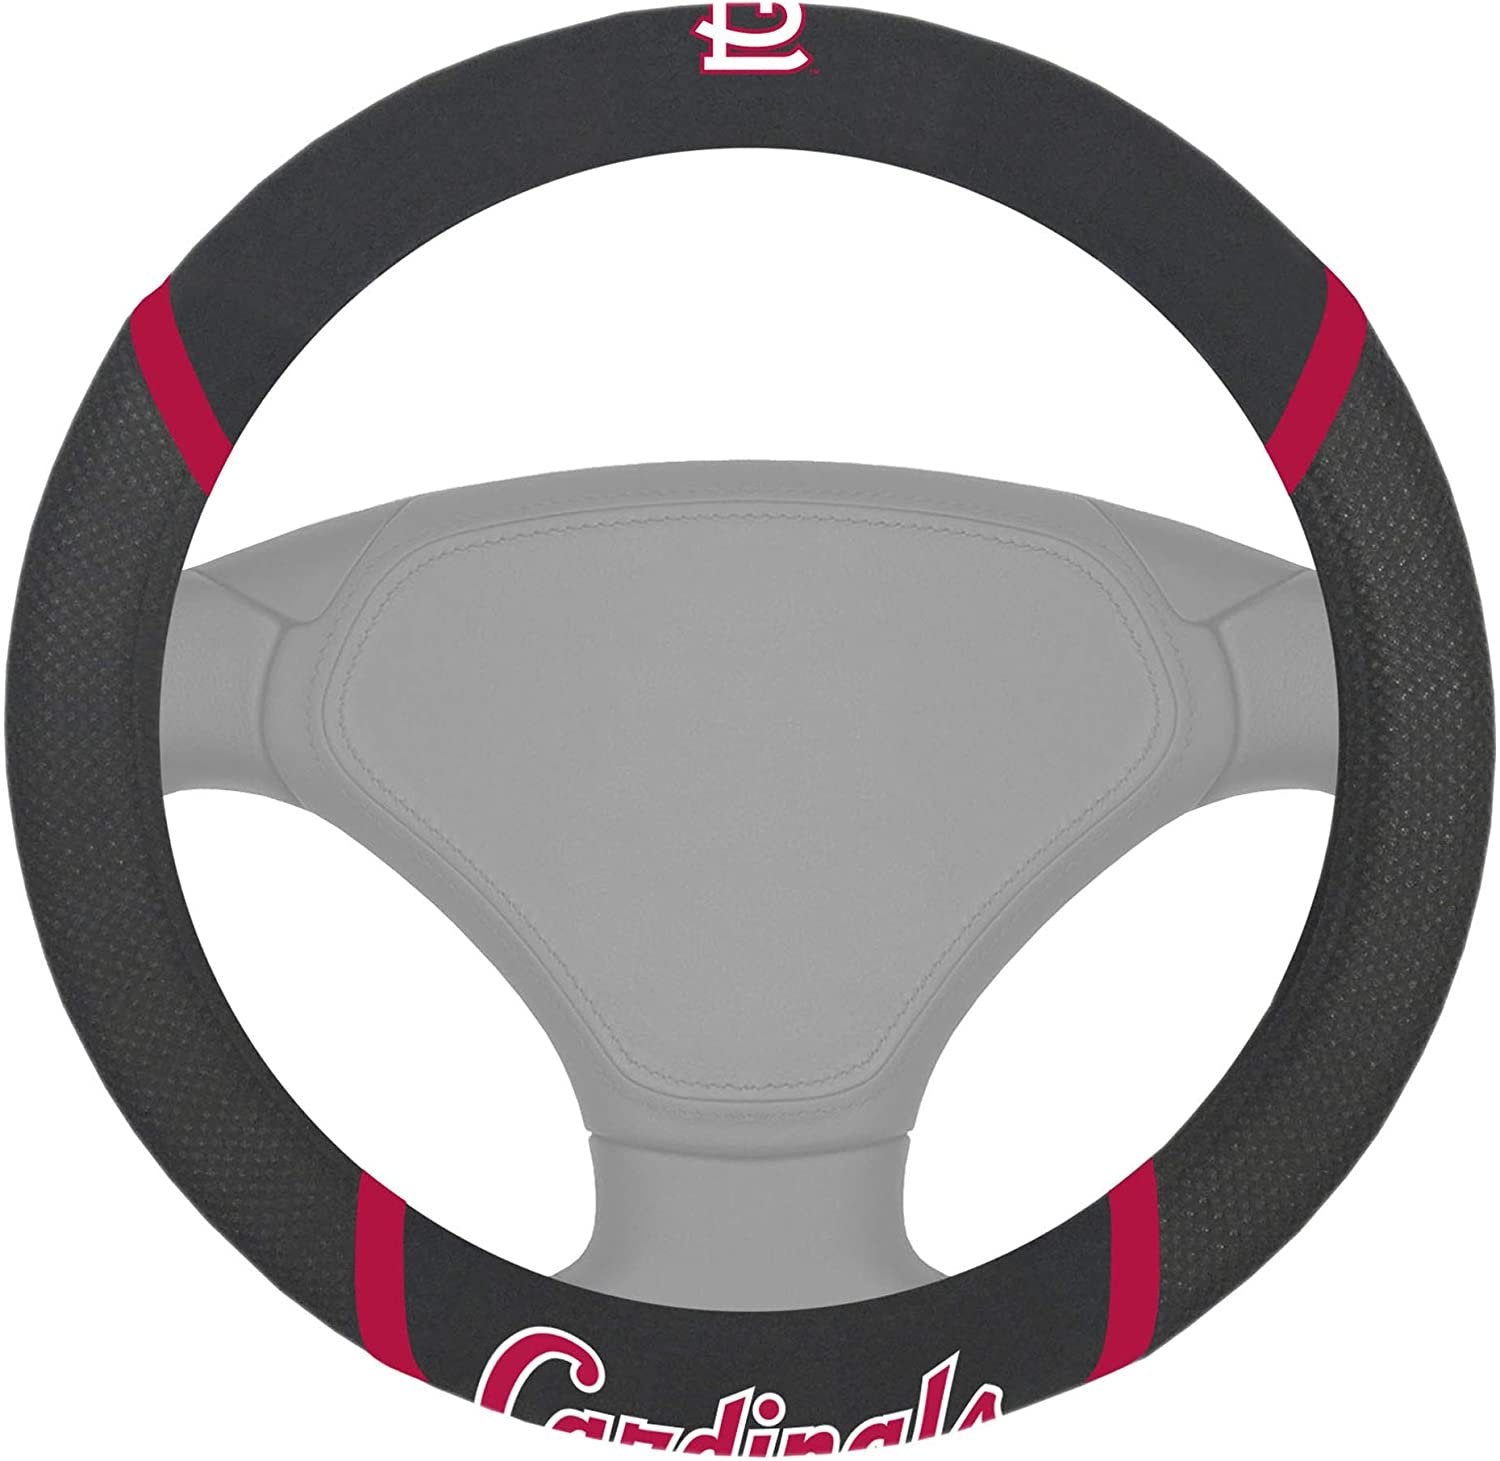 St Louis Cardinals Steering Wheel Cover Premium Embroidered Black 15 Inch